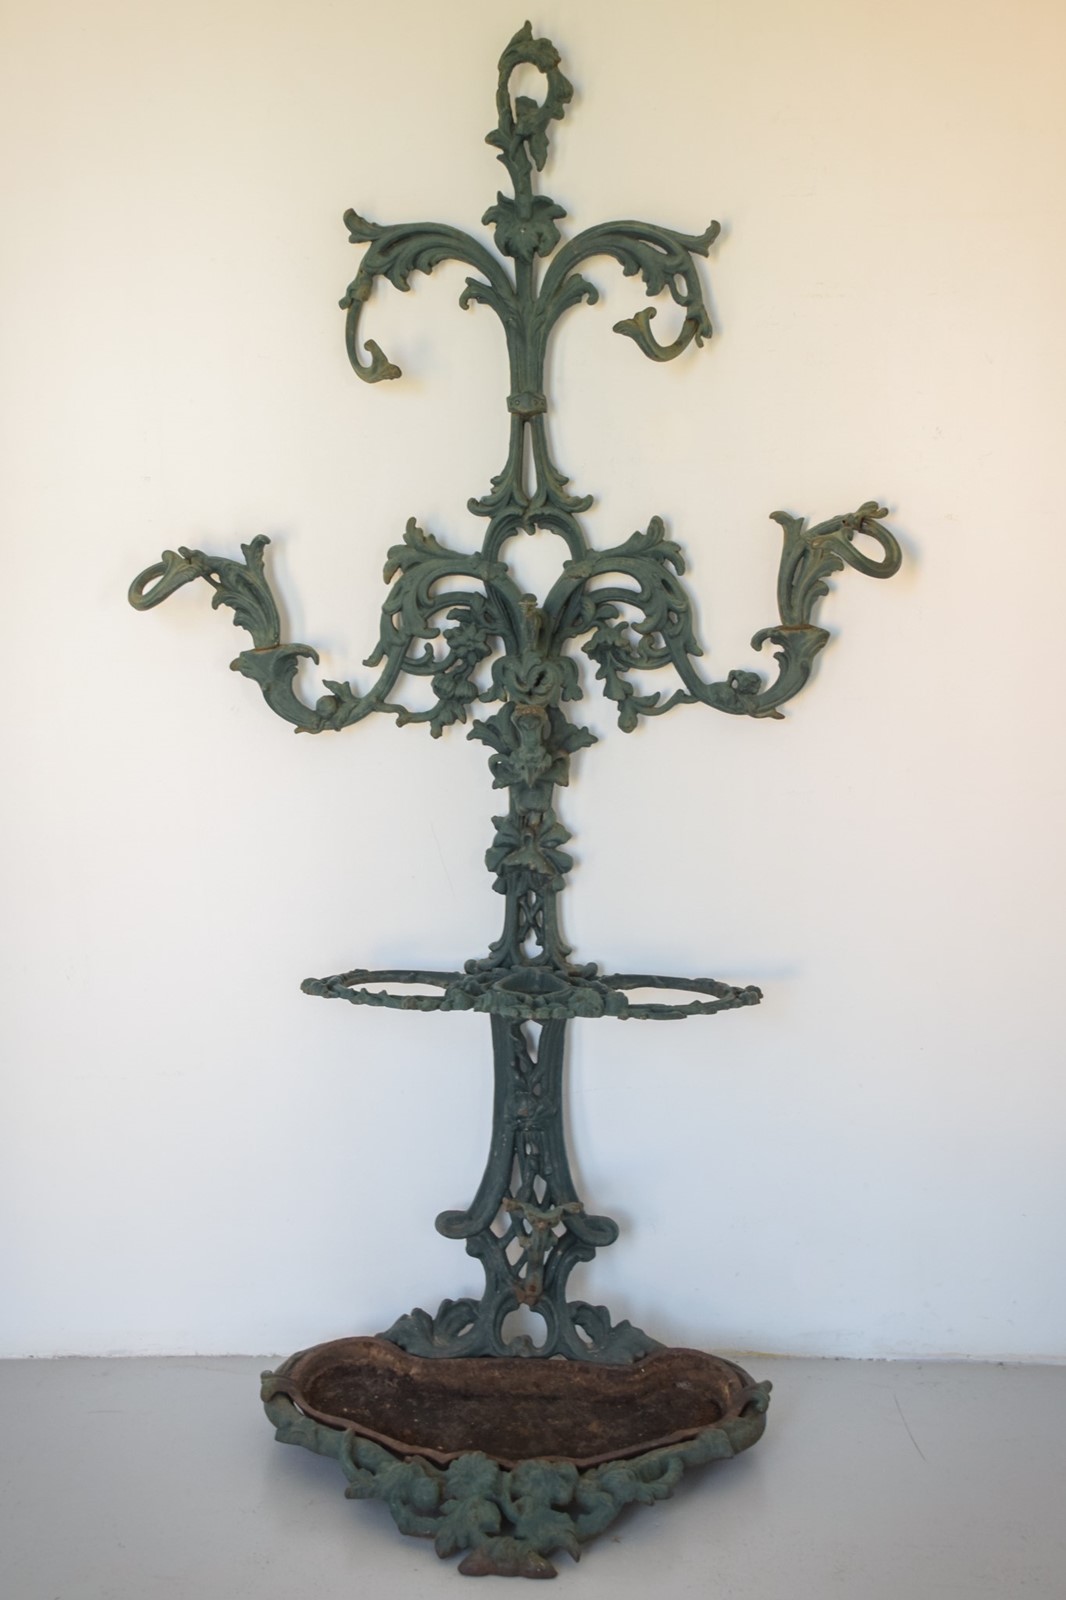 Ornate Victorian-Style Coat Rack In Cast Iron - The Hoarde Vintage